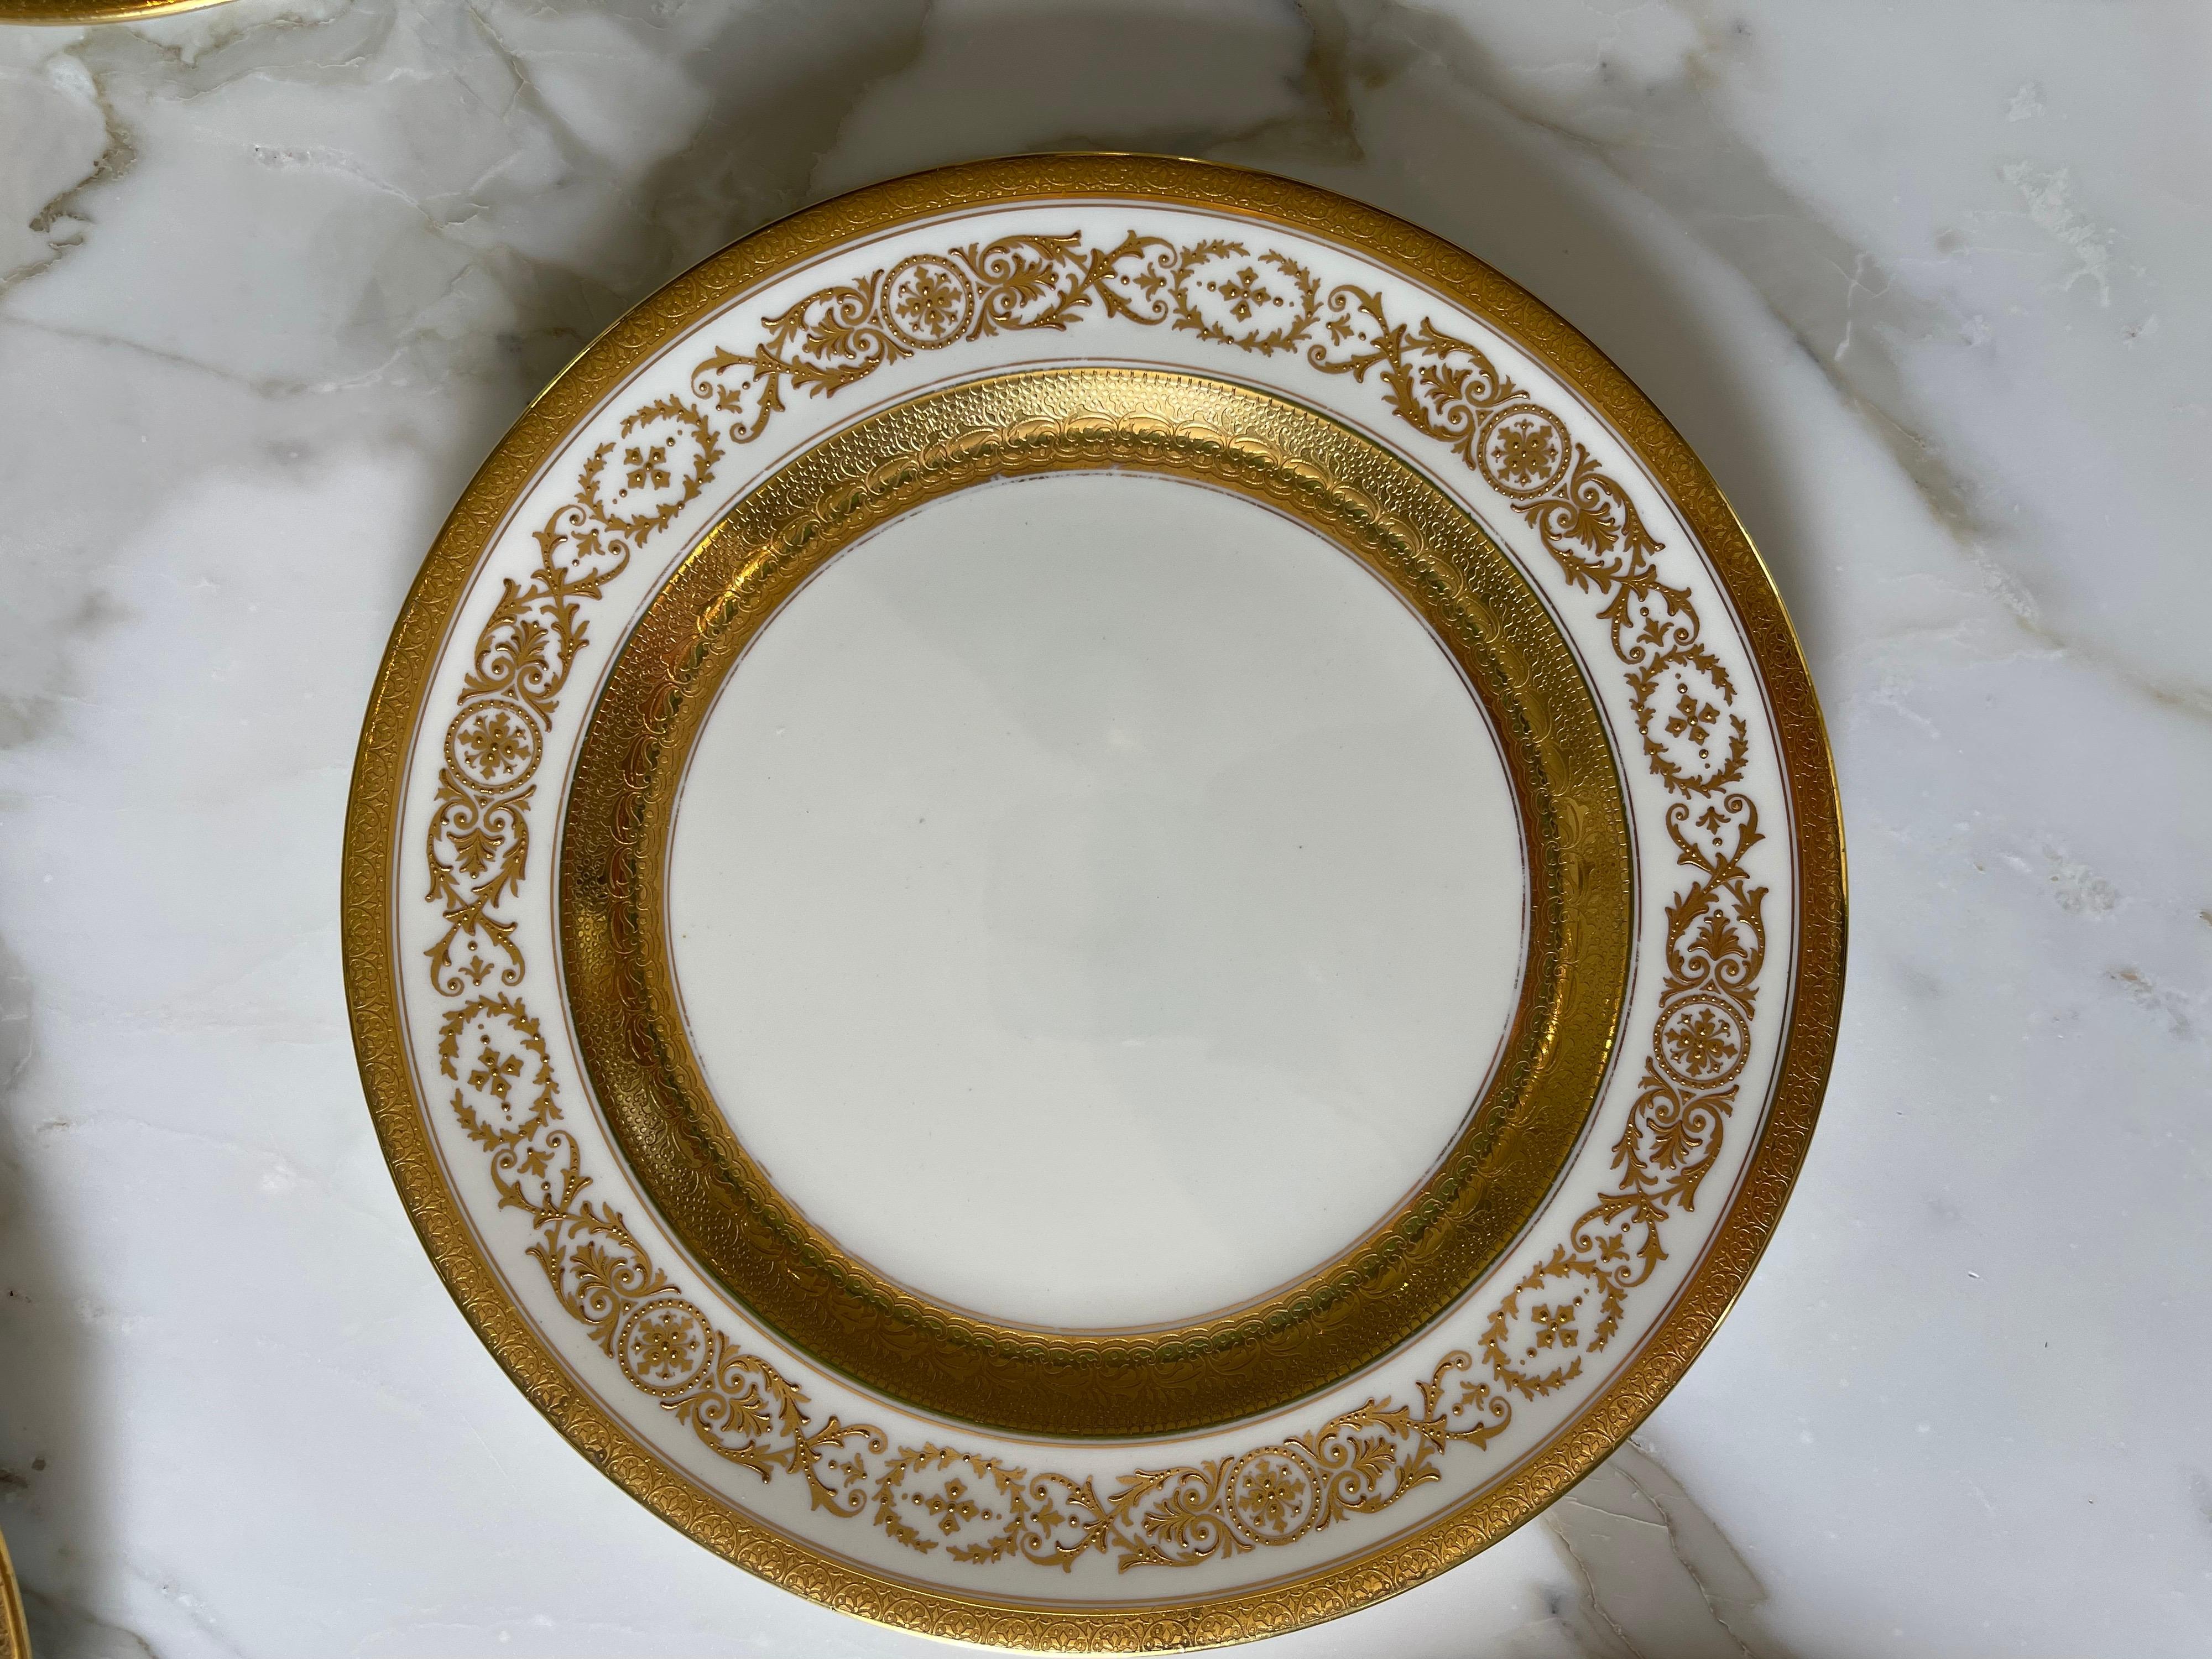 This beautiful set of 12 English crown Sutherland porcelain dinner plates was made ca 1890-1910.
The Gold border and hand applied raised Gold makes them special. 
Makers Mark on the back and the number “3821”
Gilt bottom rim.